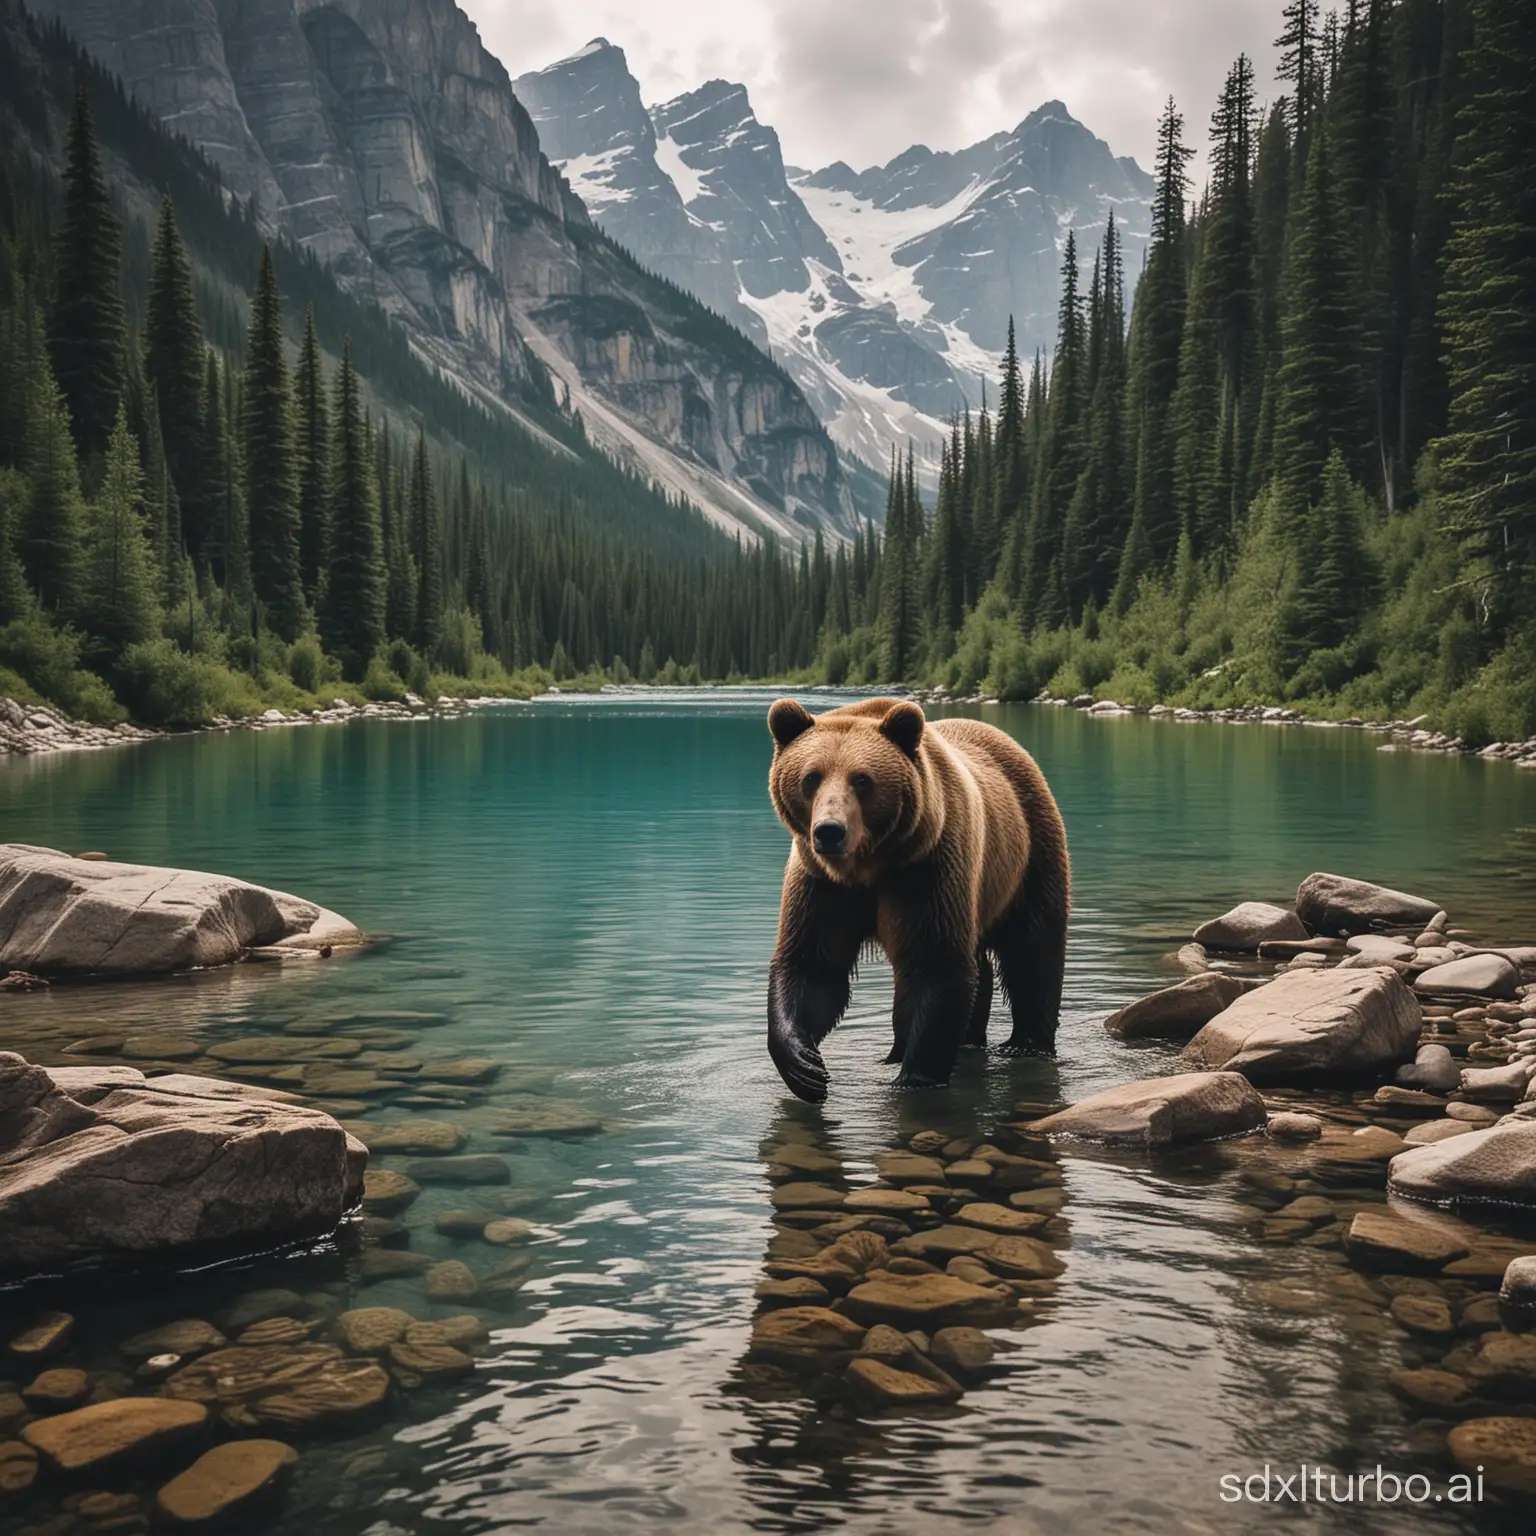 Scenic-Mountain-Landscape-with-Bear